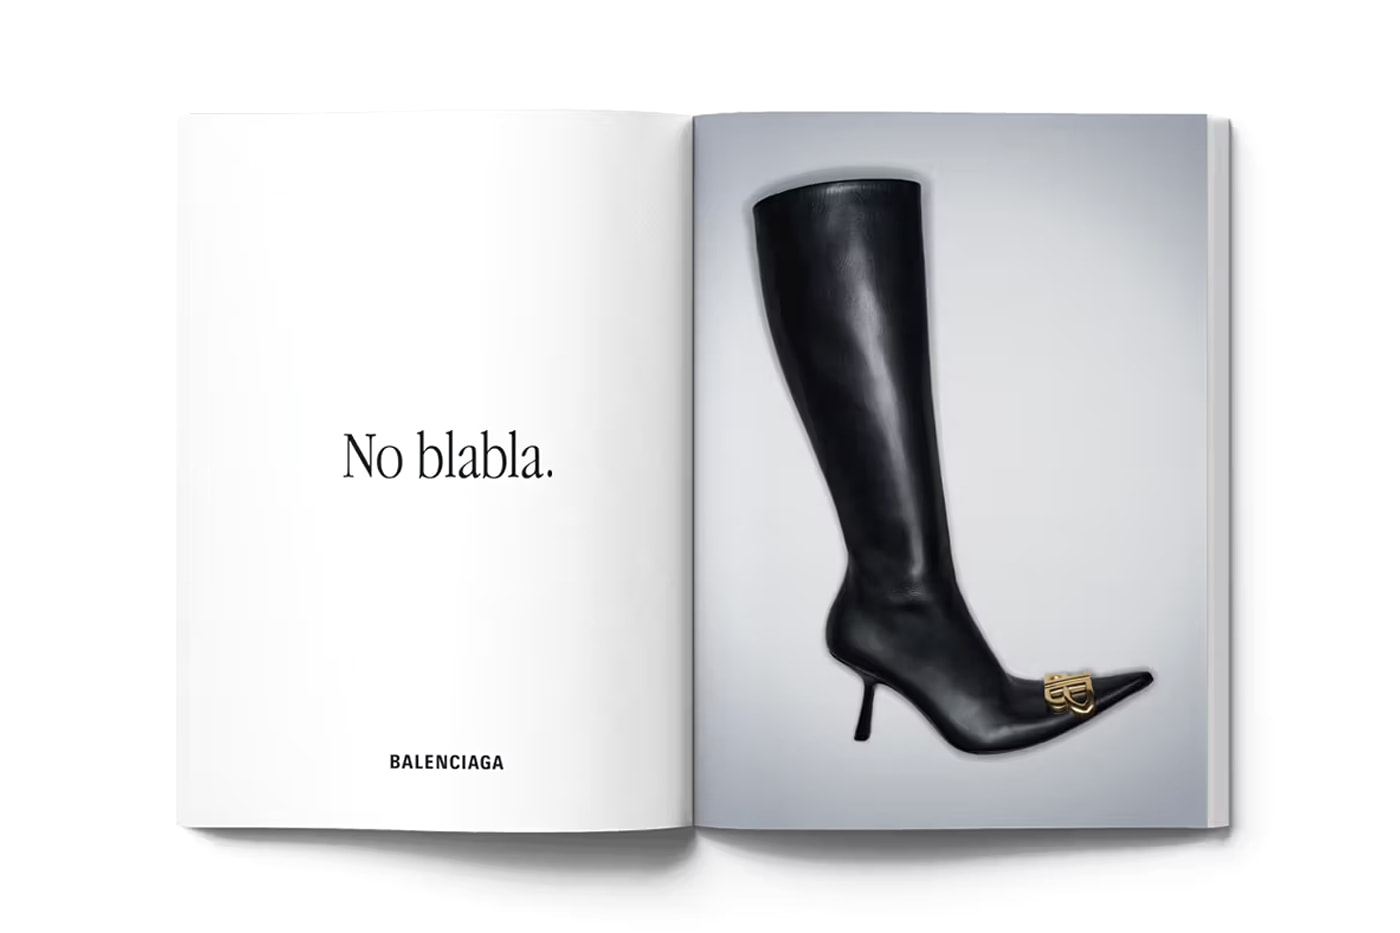 Balenciaga Delivers Tounge-in-Cheek "It's Different" Campaign